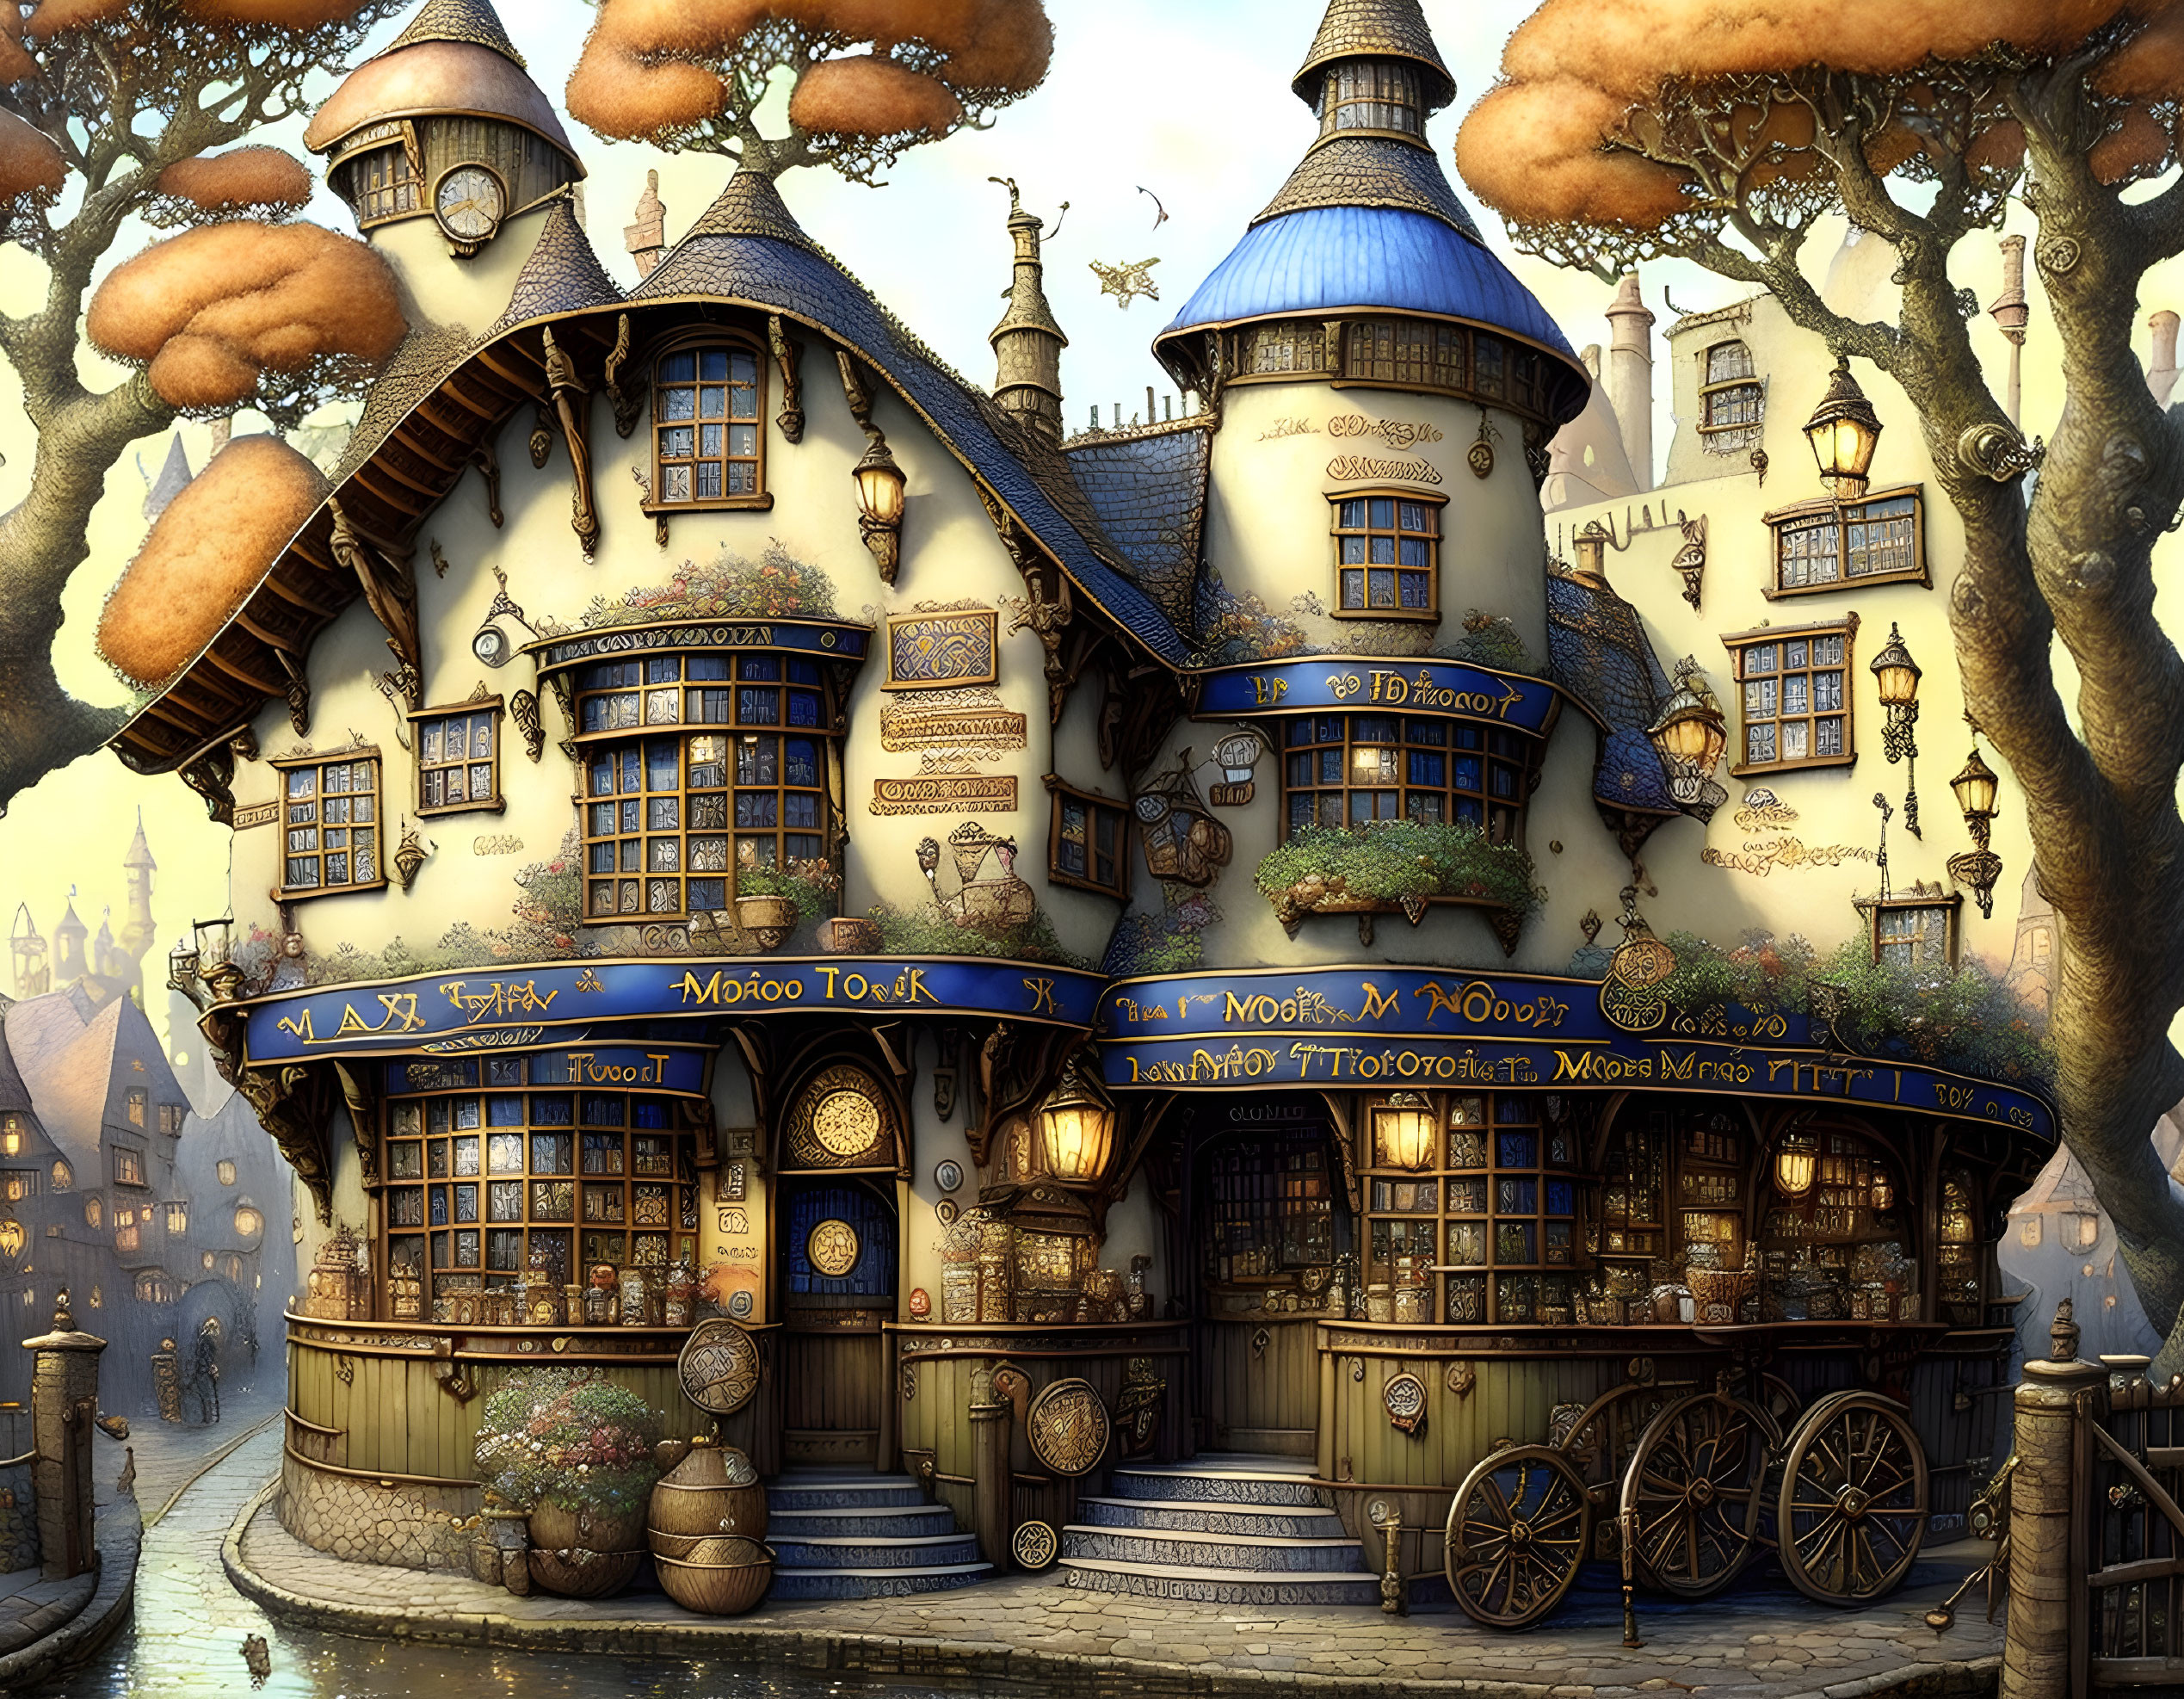 Whimsical Fantasy Bookstore with Blue Roofs and Tree-like Structures